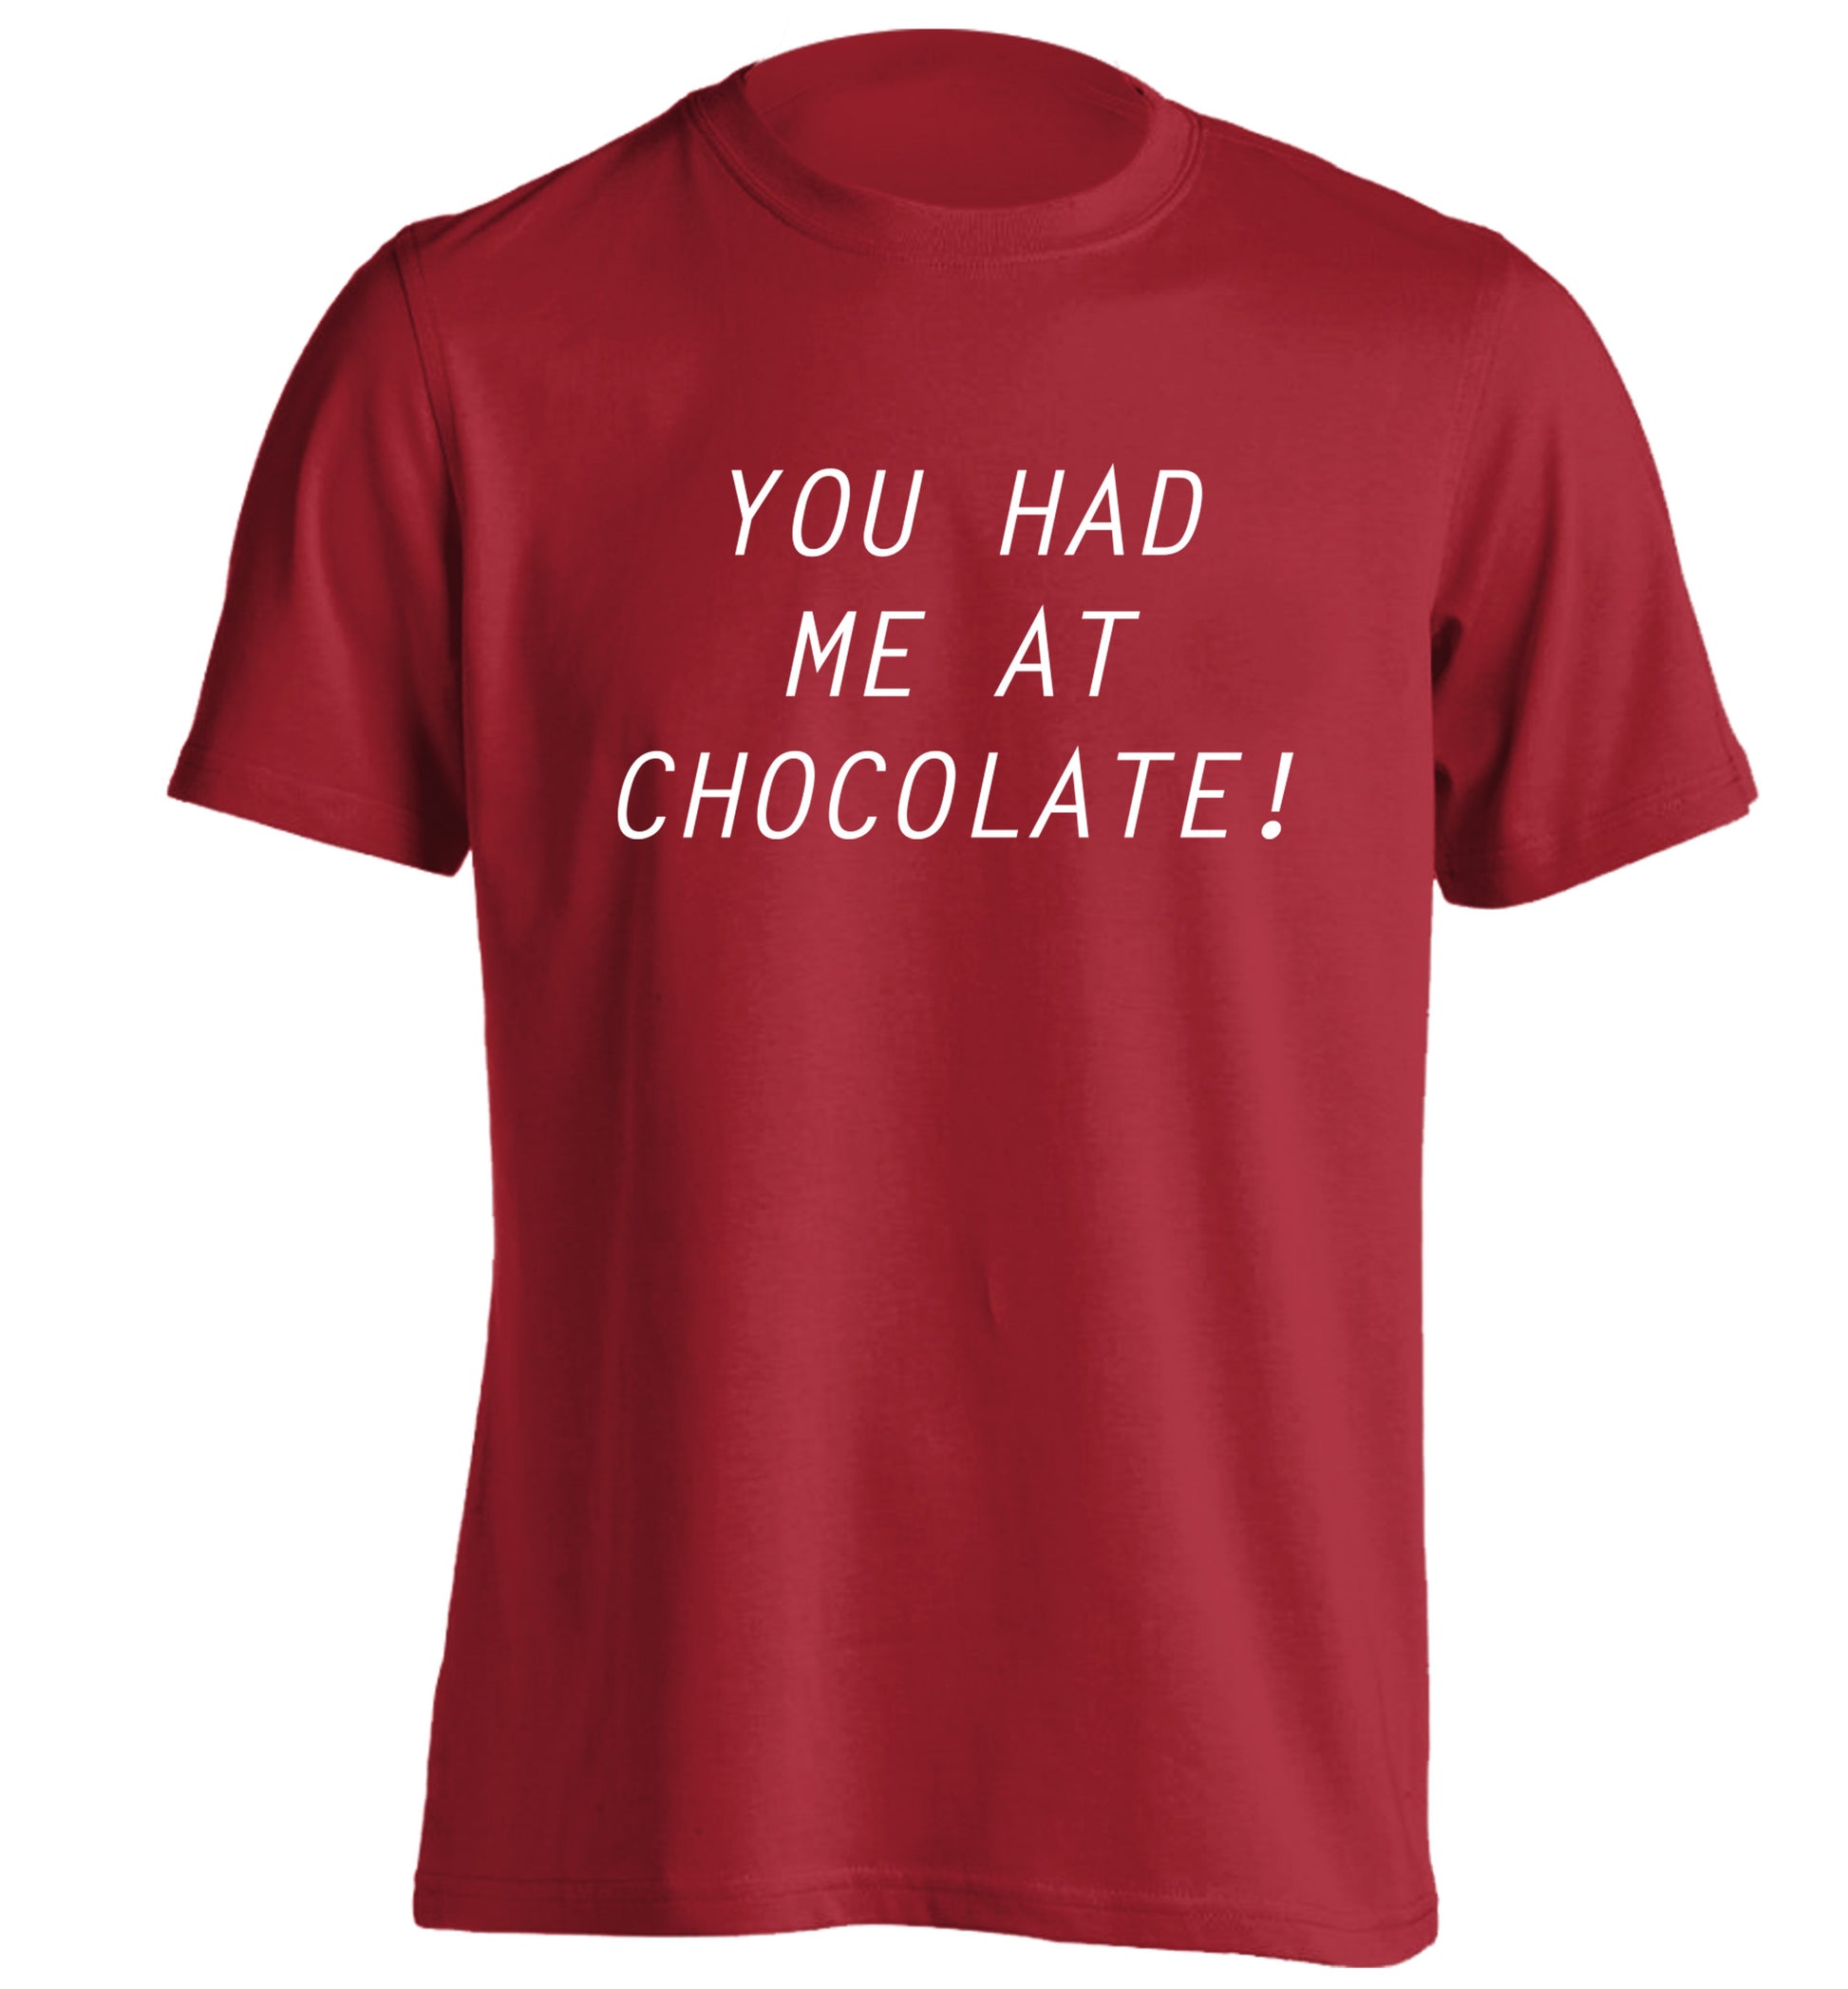 You had me at chocolate adults unisex red Tshirt 2XL